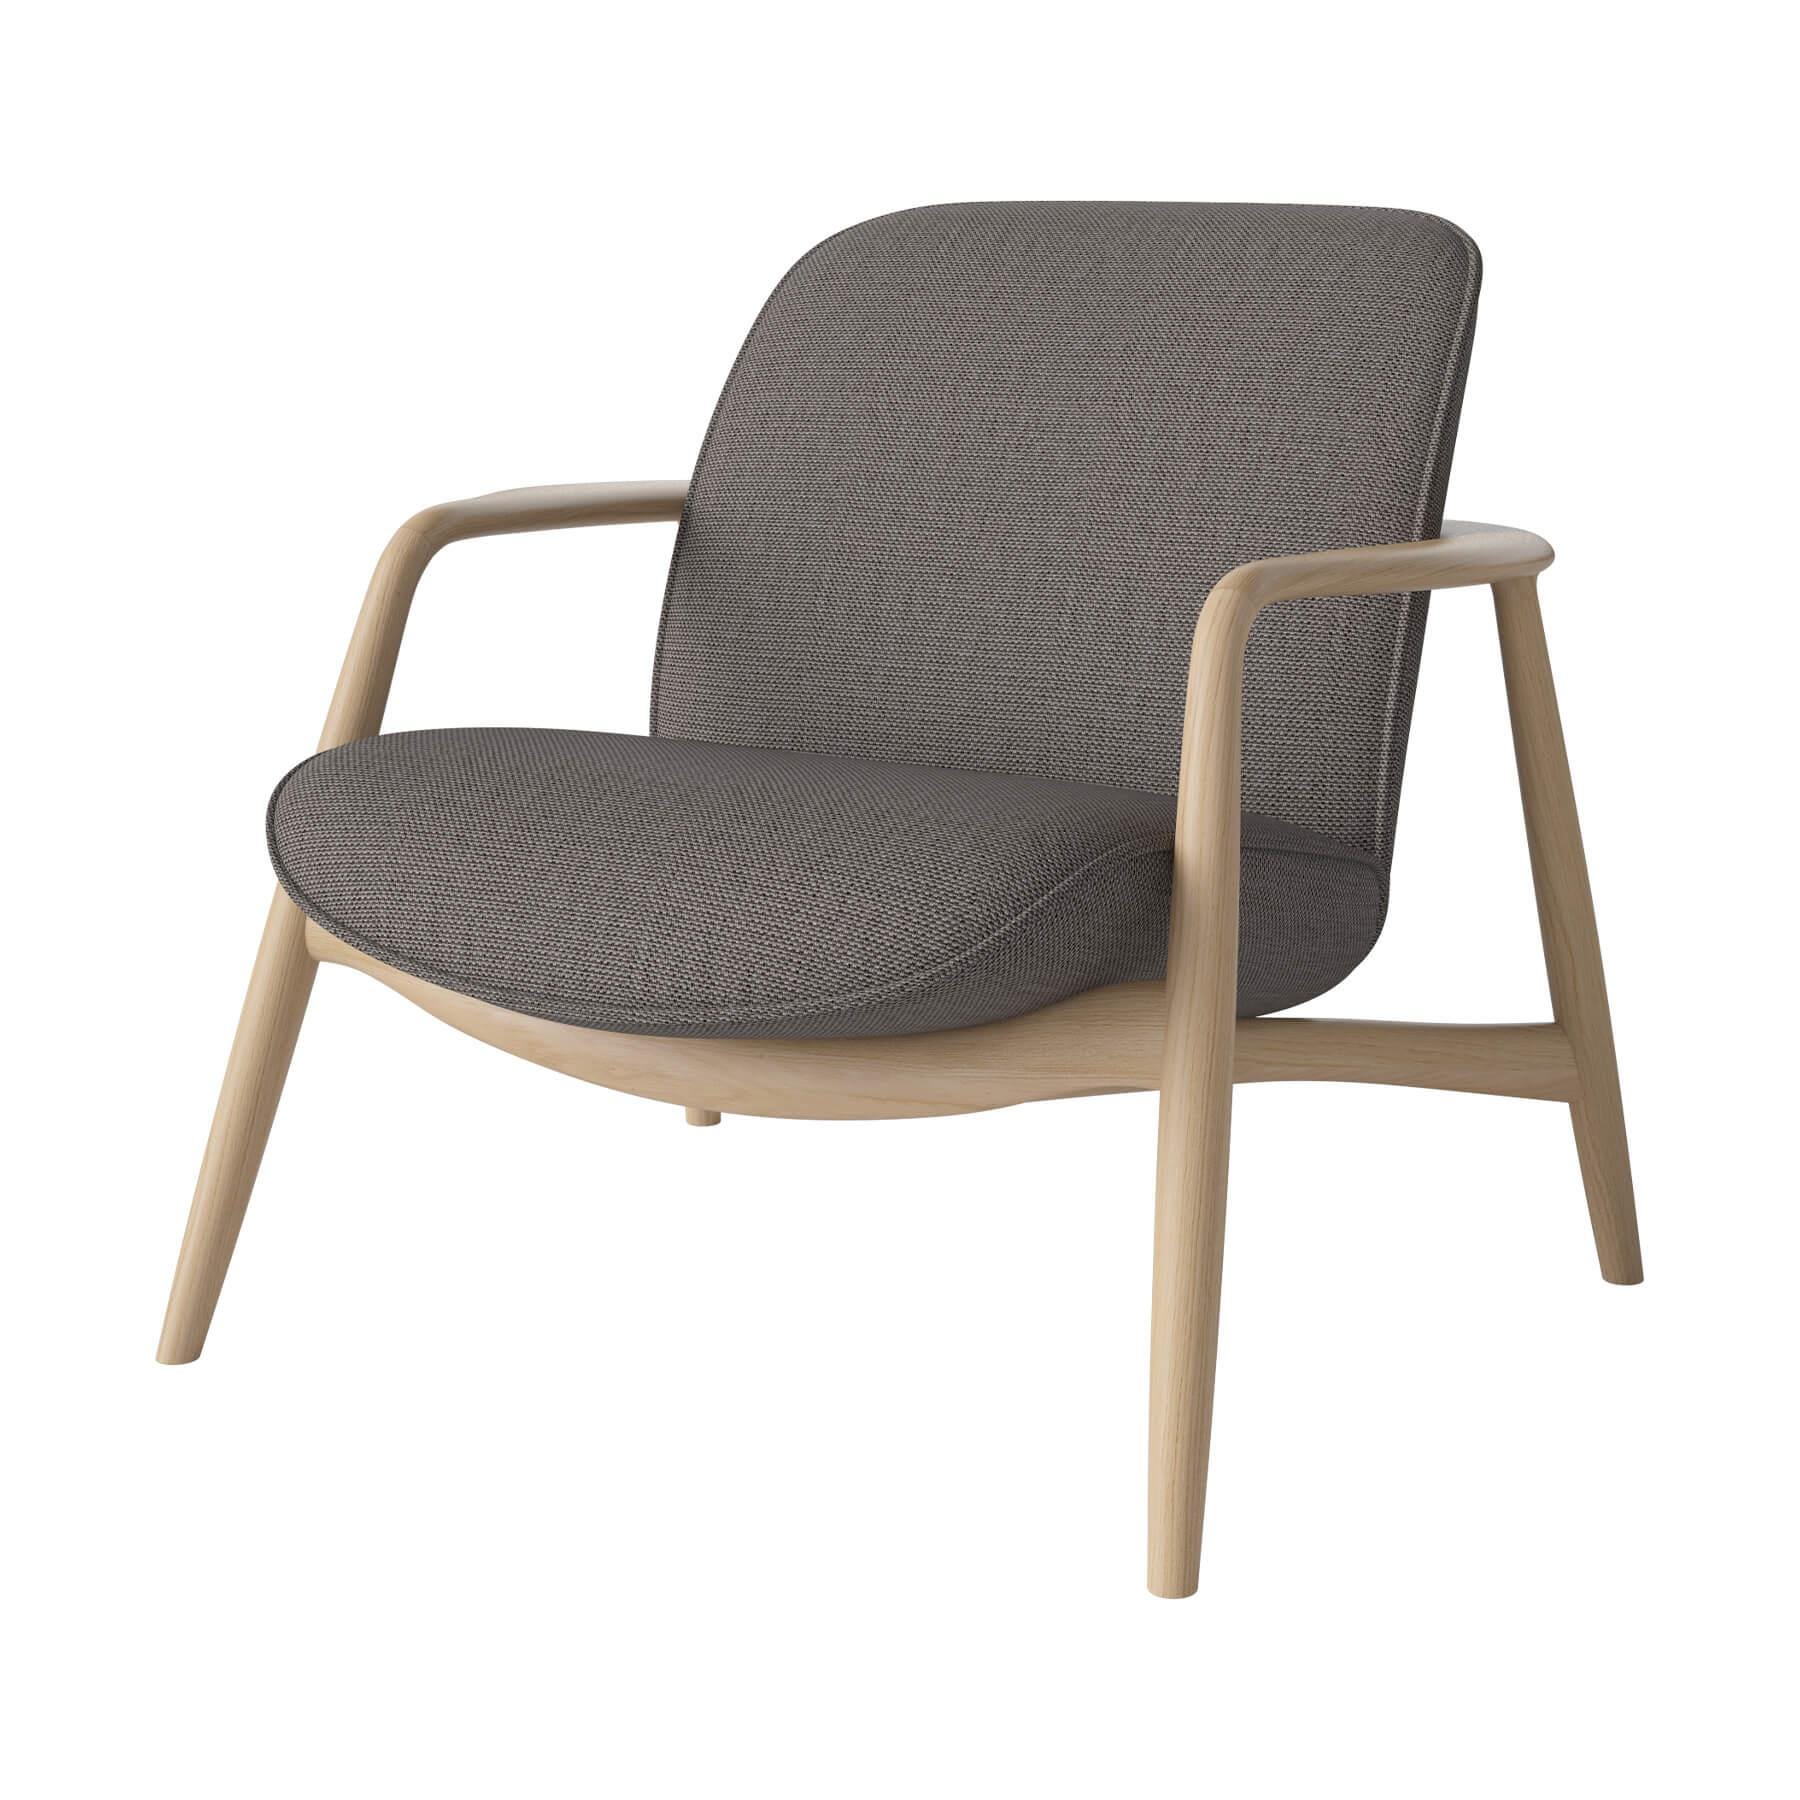 Bolia Bowie Armchair White Oiled Oak London Brown Designer Furniture From Holloways Of Ludlow